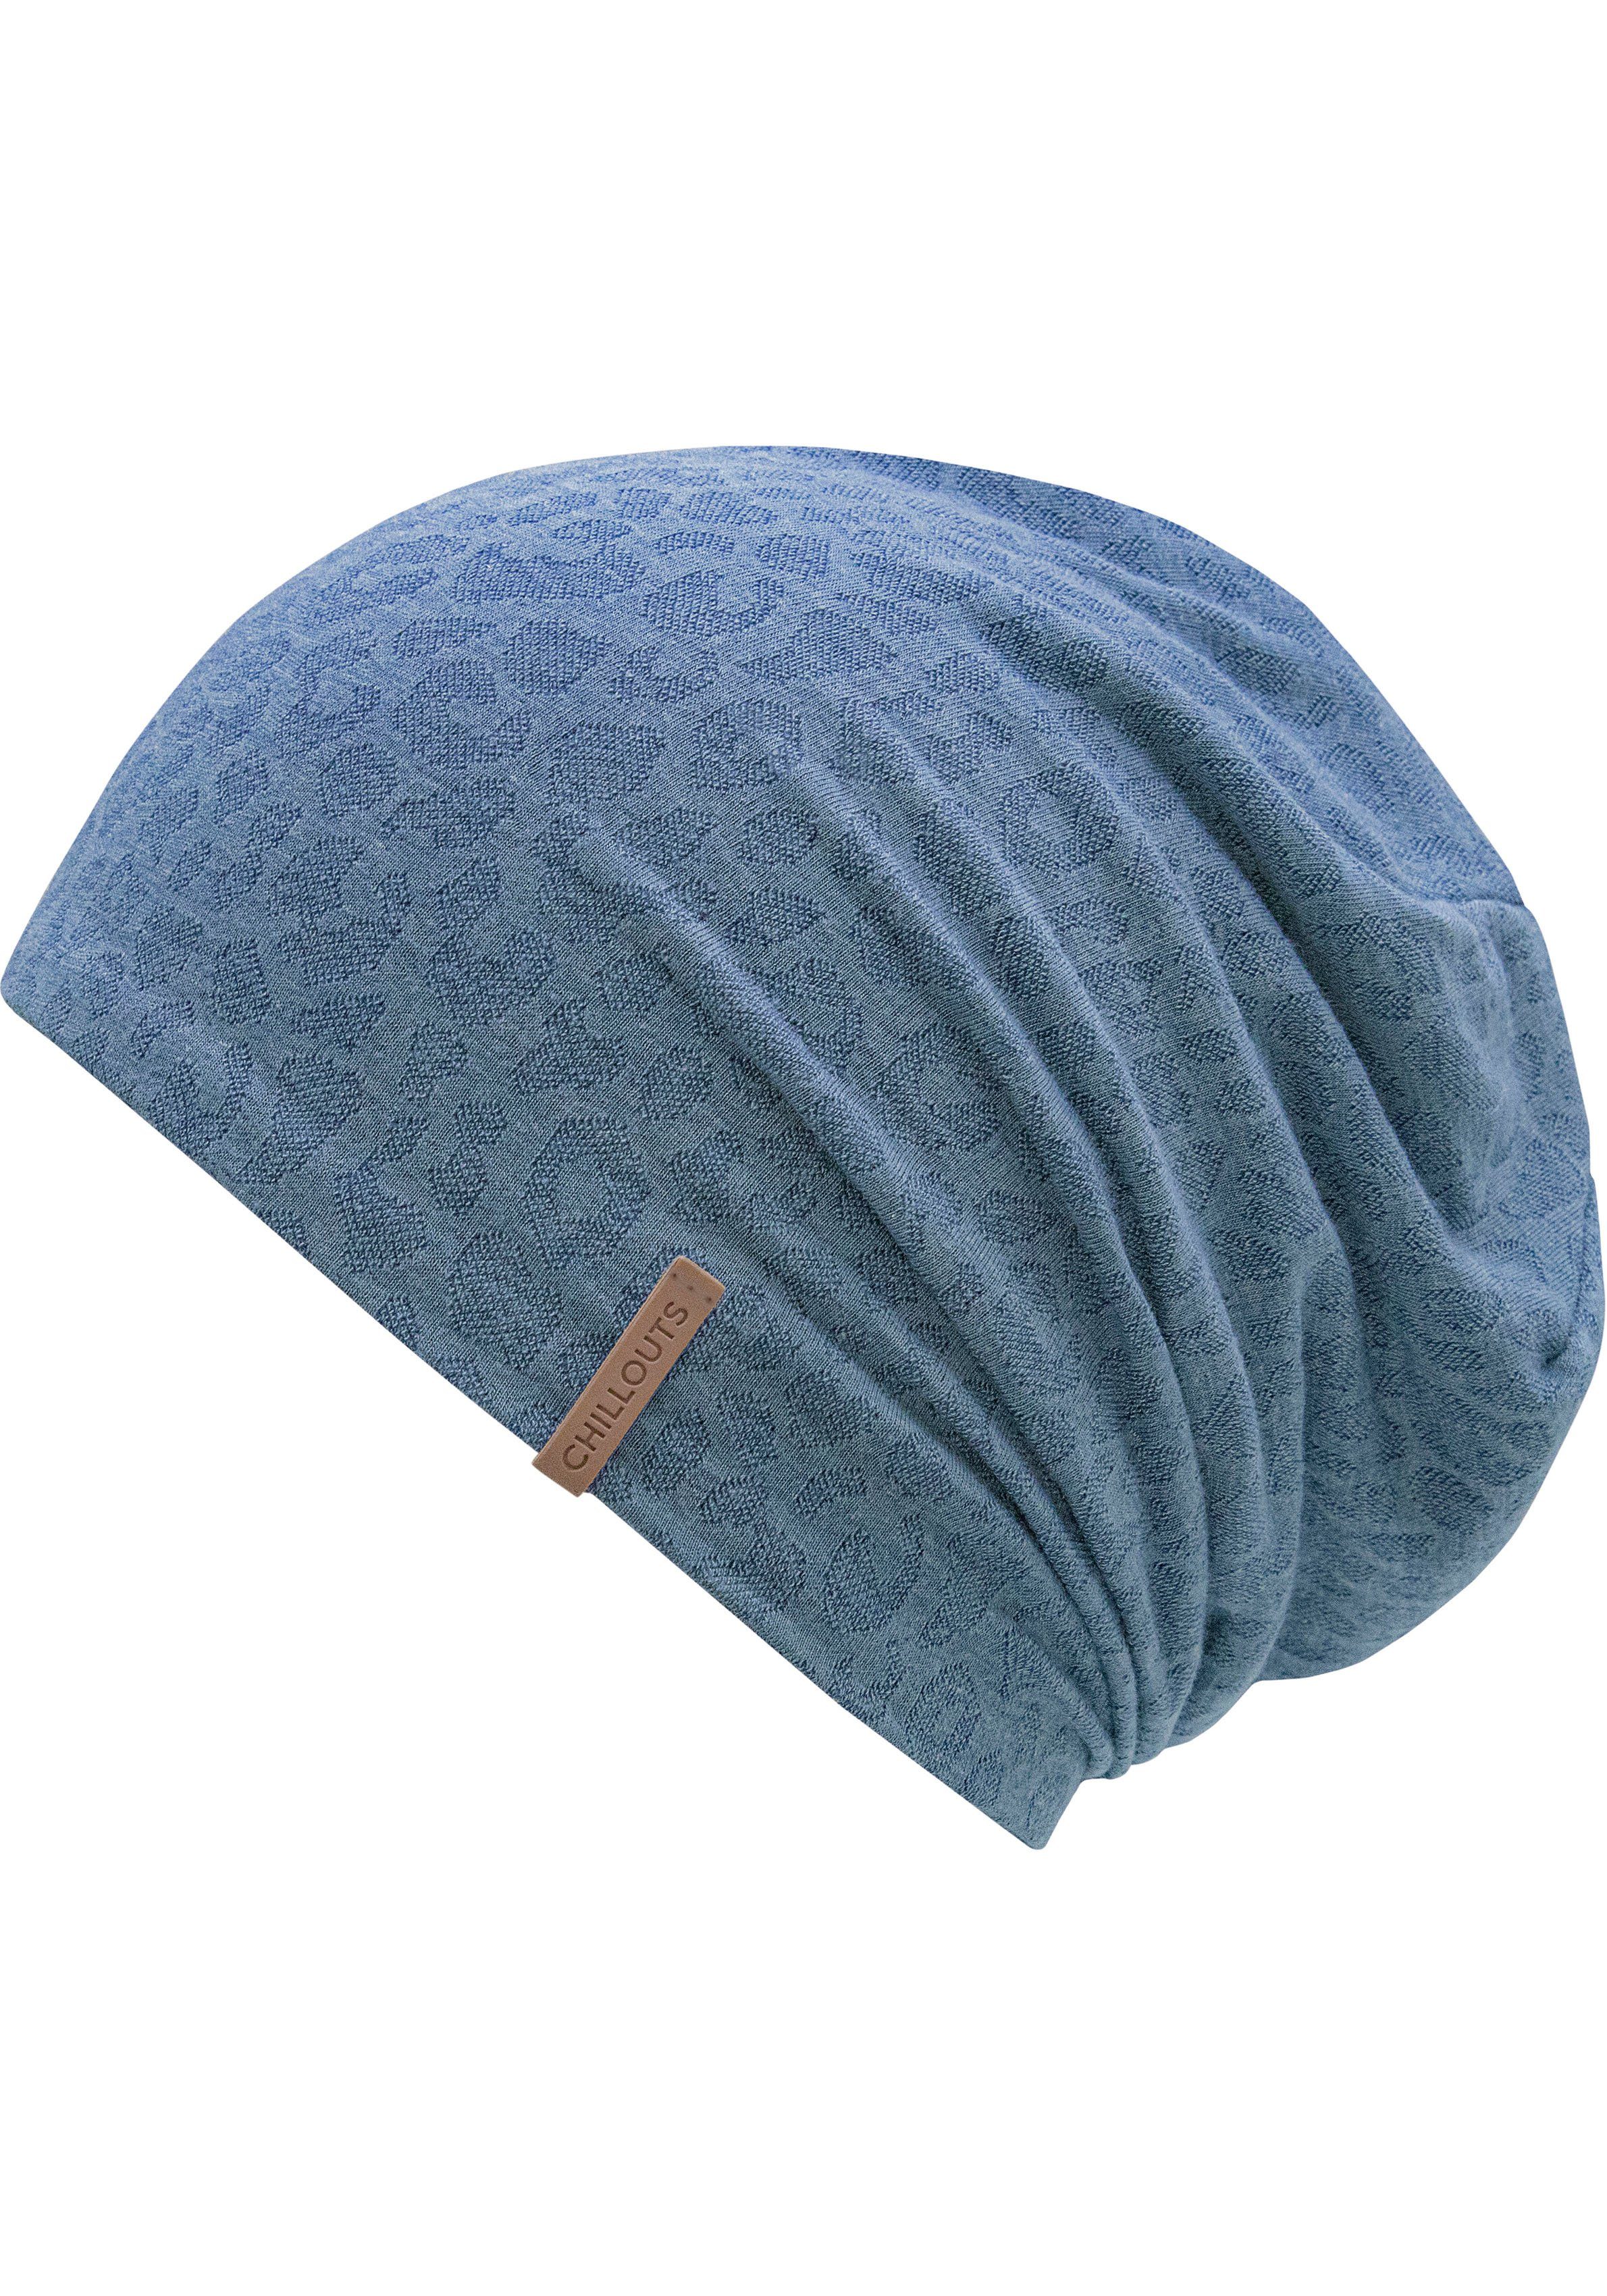 Hat Rochester chillouts jeans Beanie